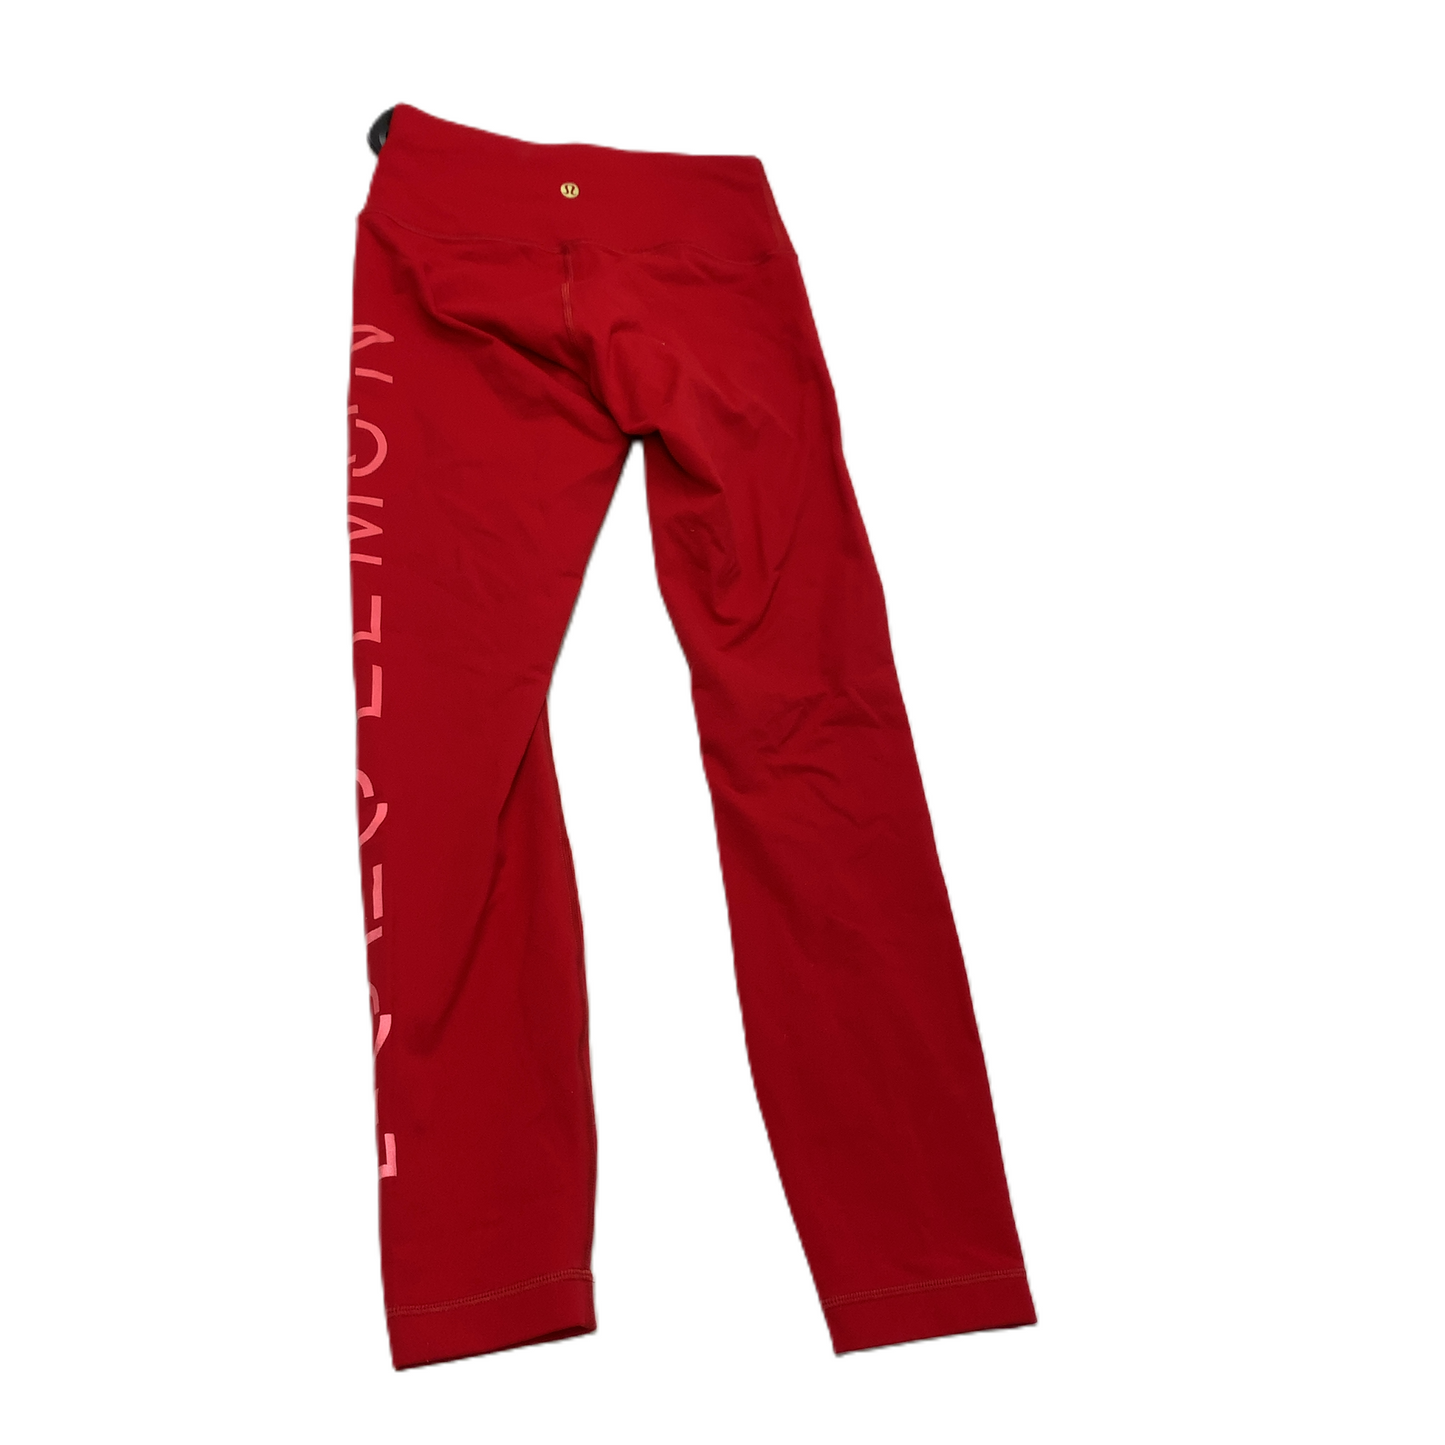 Red  Athletic Leggings By Lululemon  Size: S